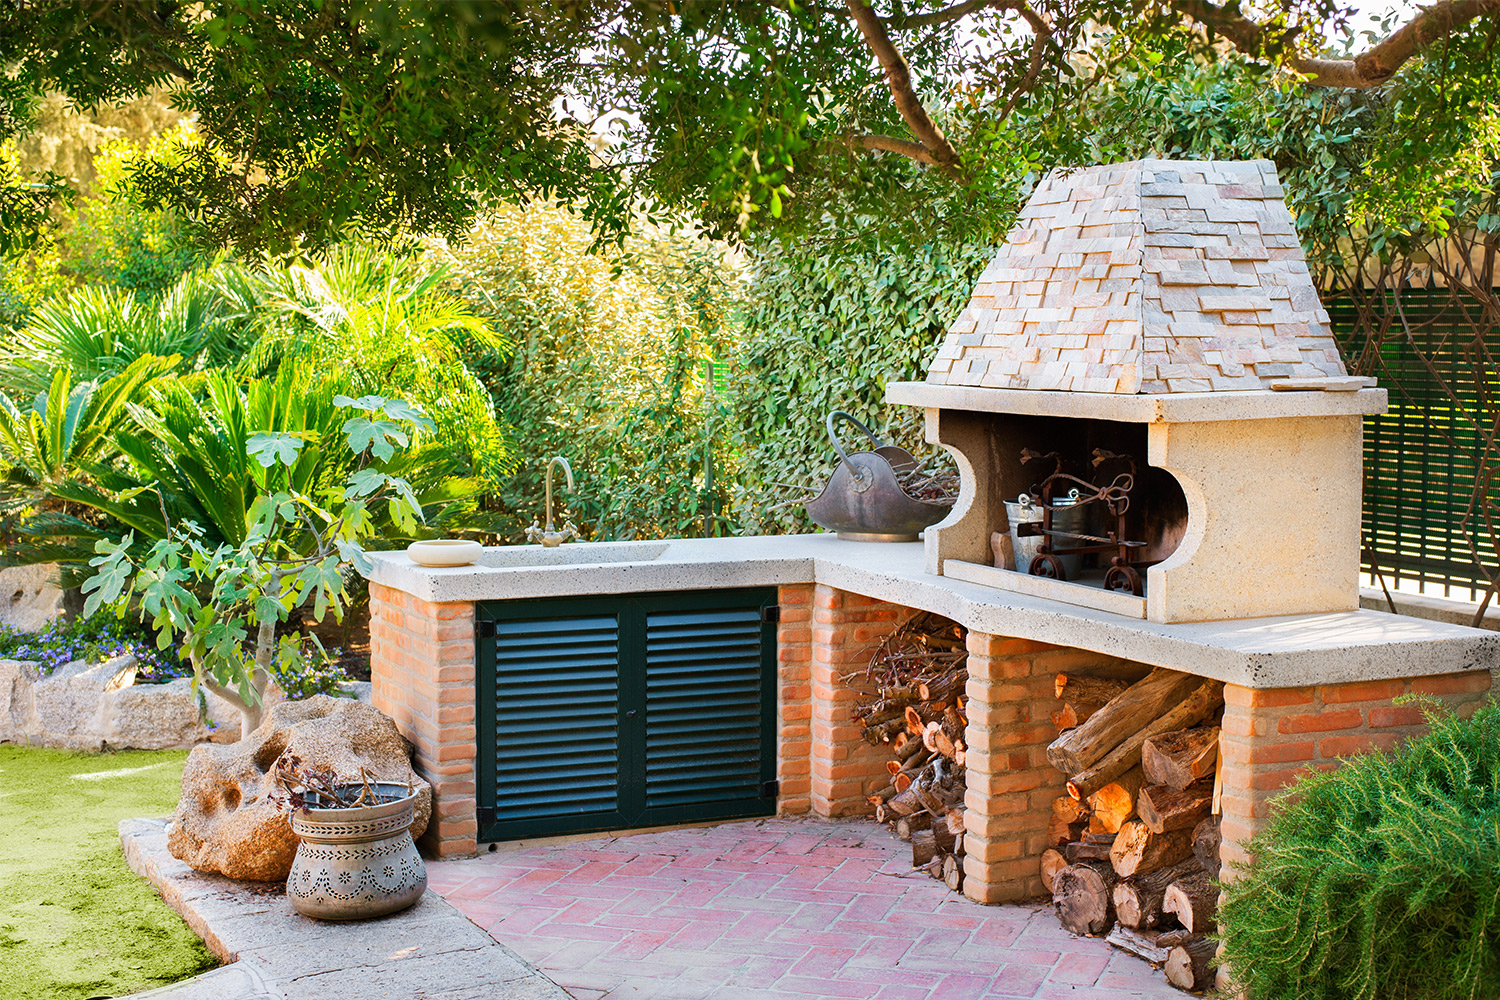 Outdoor kitchen with oven and sink